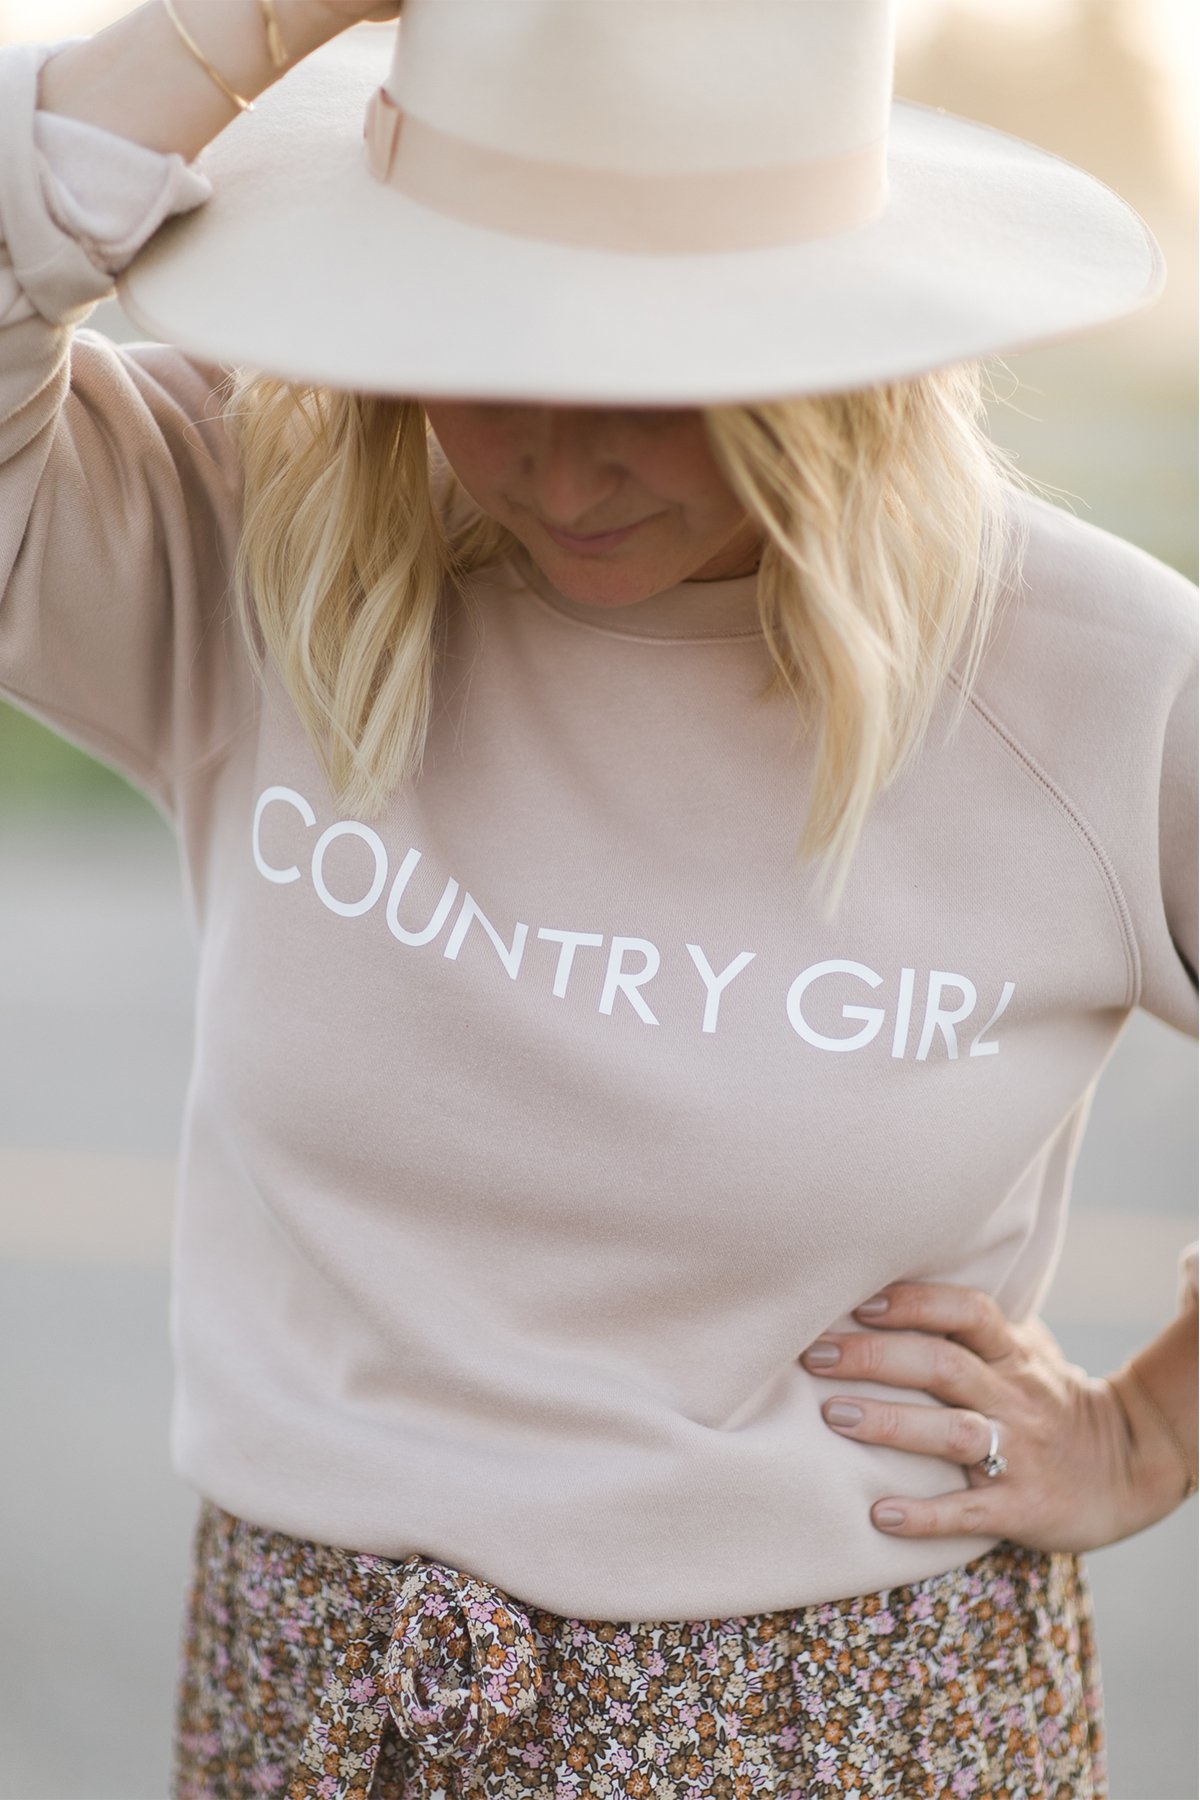 country girl clothing stores